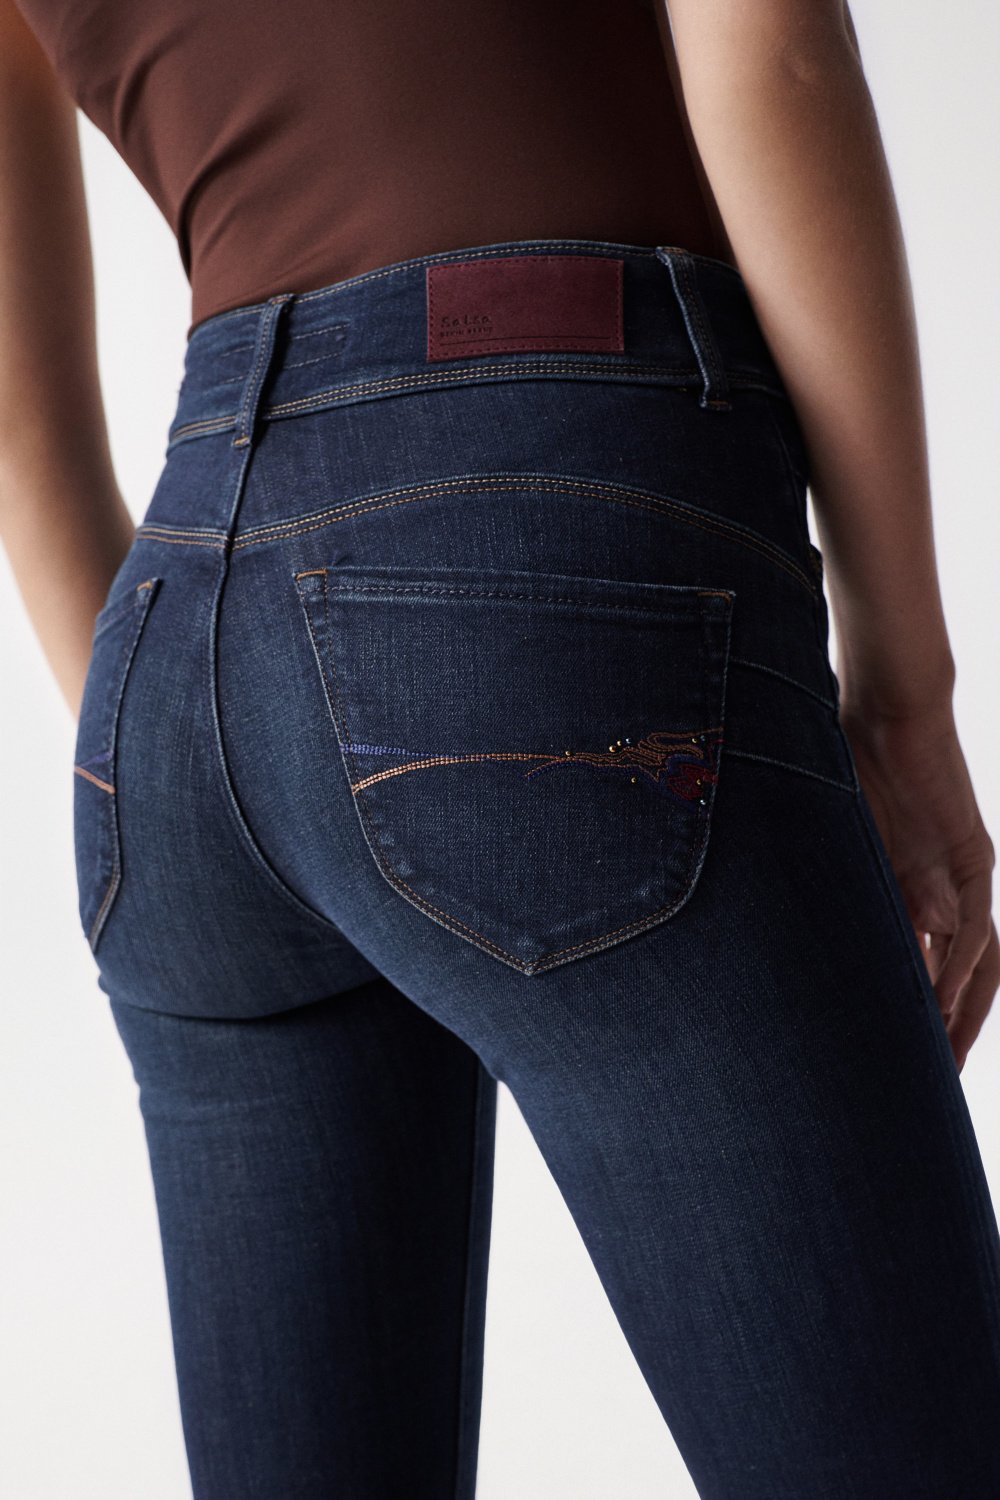 SECRET PUSH IN JEANS WITH EMBROIDERY ON THE POCKET - Salsa